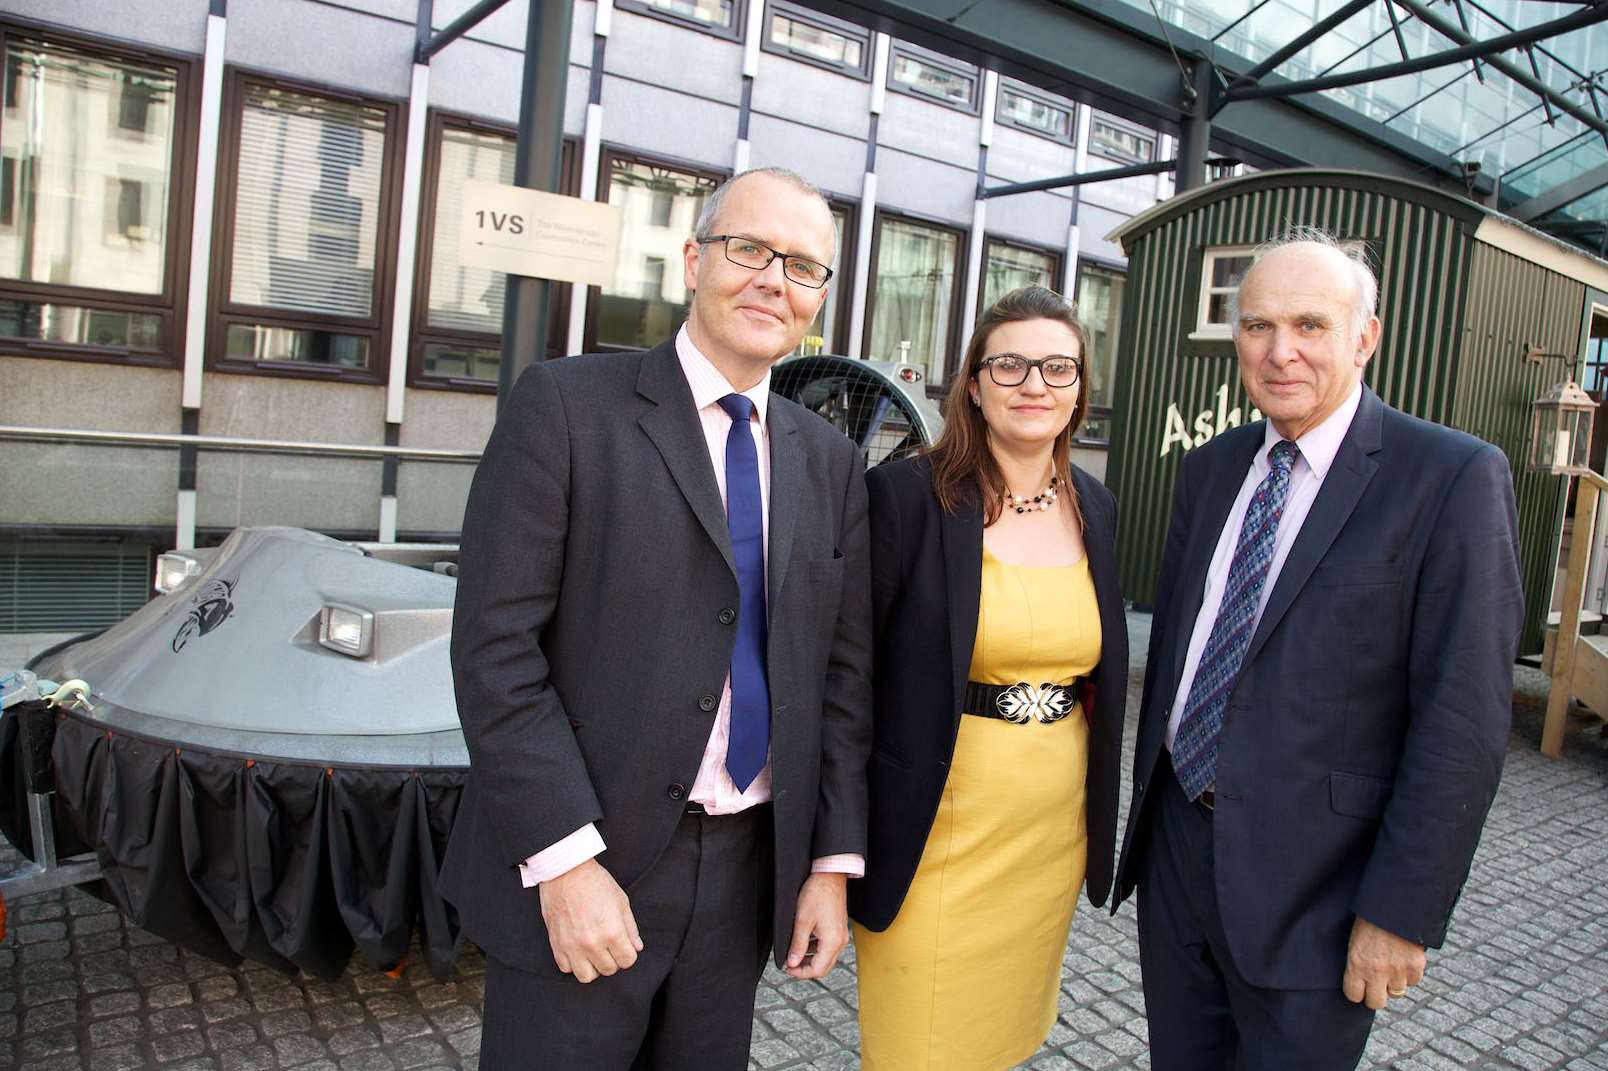 From left, Manufacturing Advisory Service’s Stephen Peacock, Flying Fish's Emma Pullen and Business Secretary Vince Cable